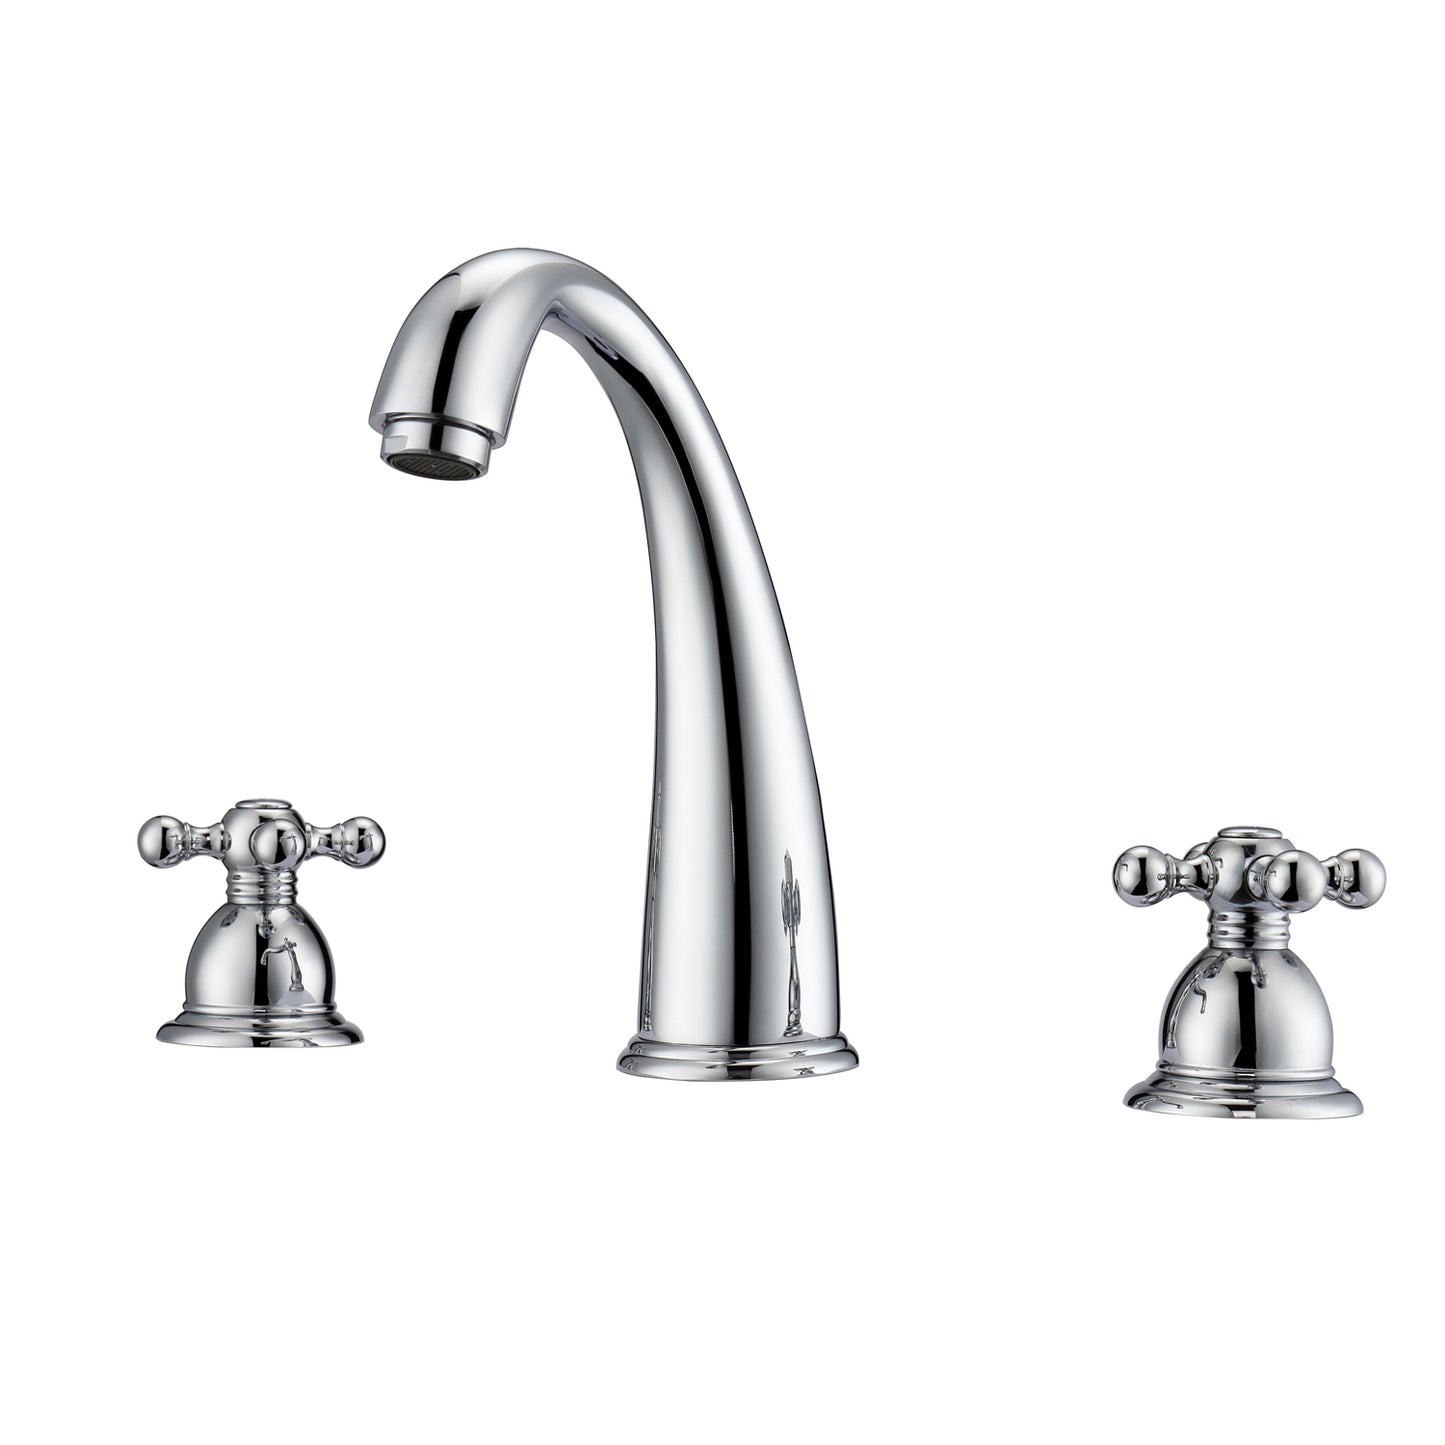 Maddox 8" Widespread Chrome Bathroom Faucet with Metal Cross Handles